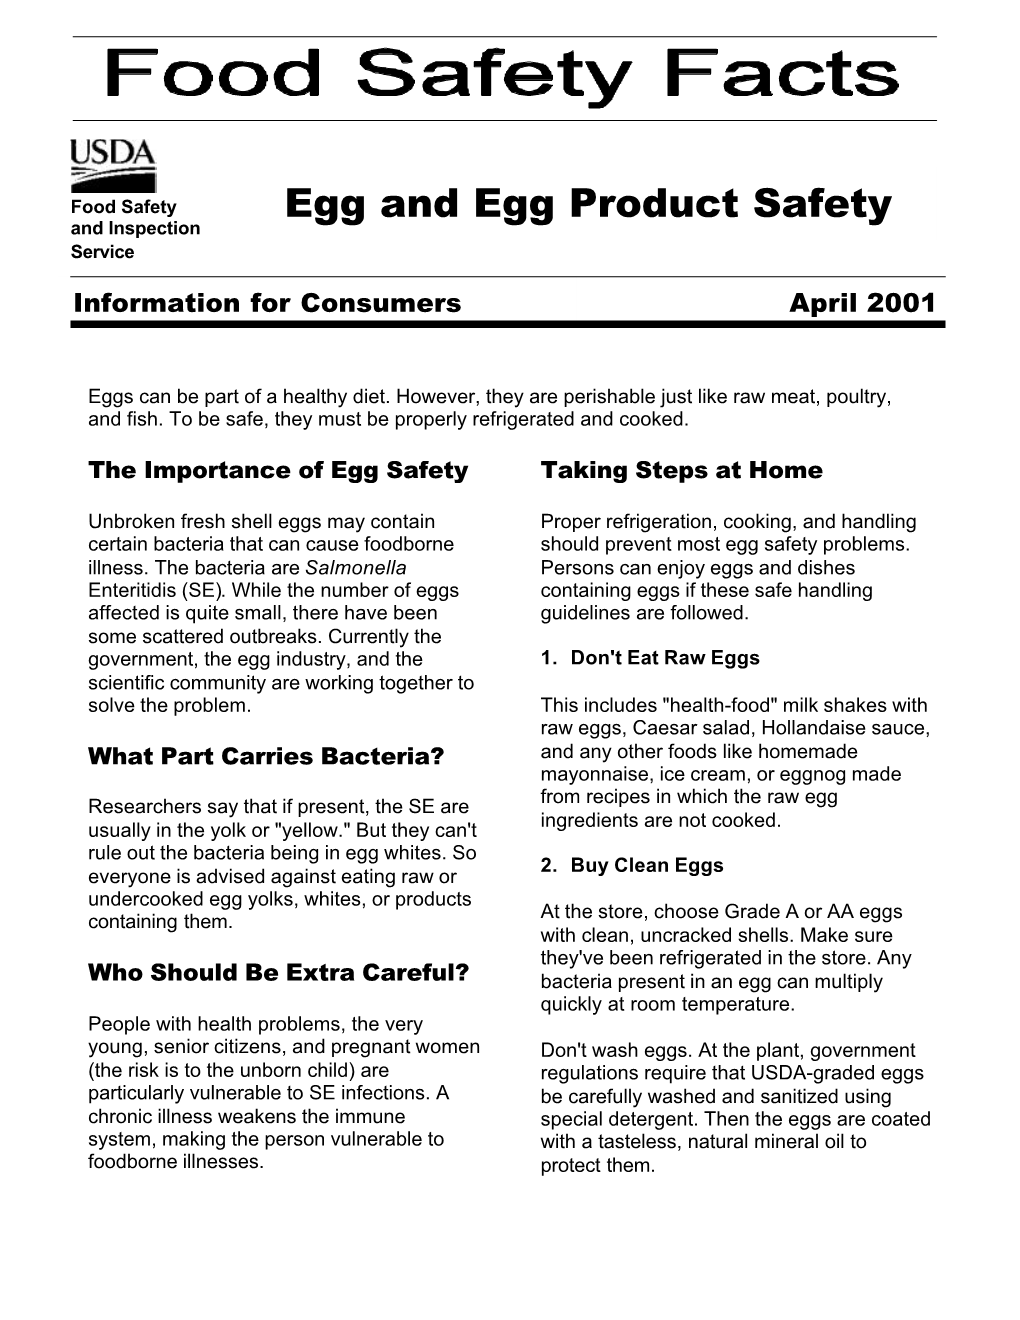 Egg and Egg Product Safety and Inspection Service